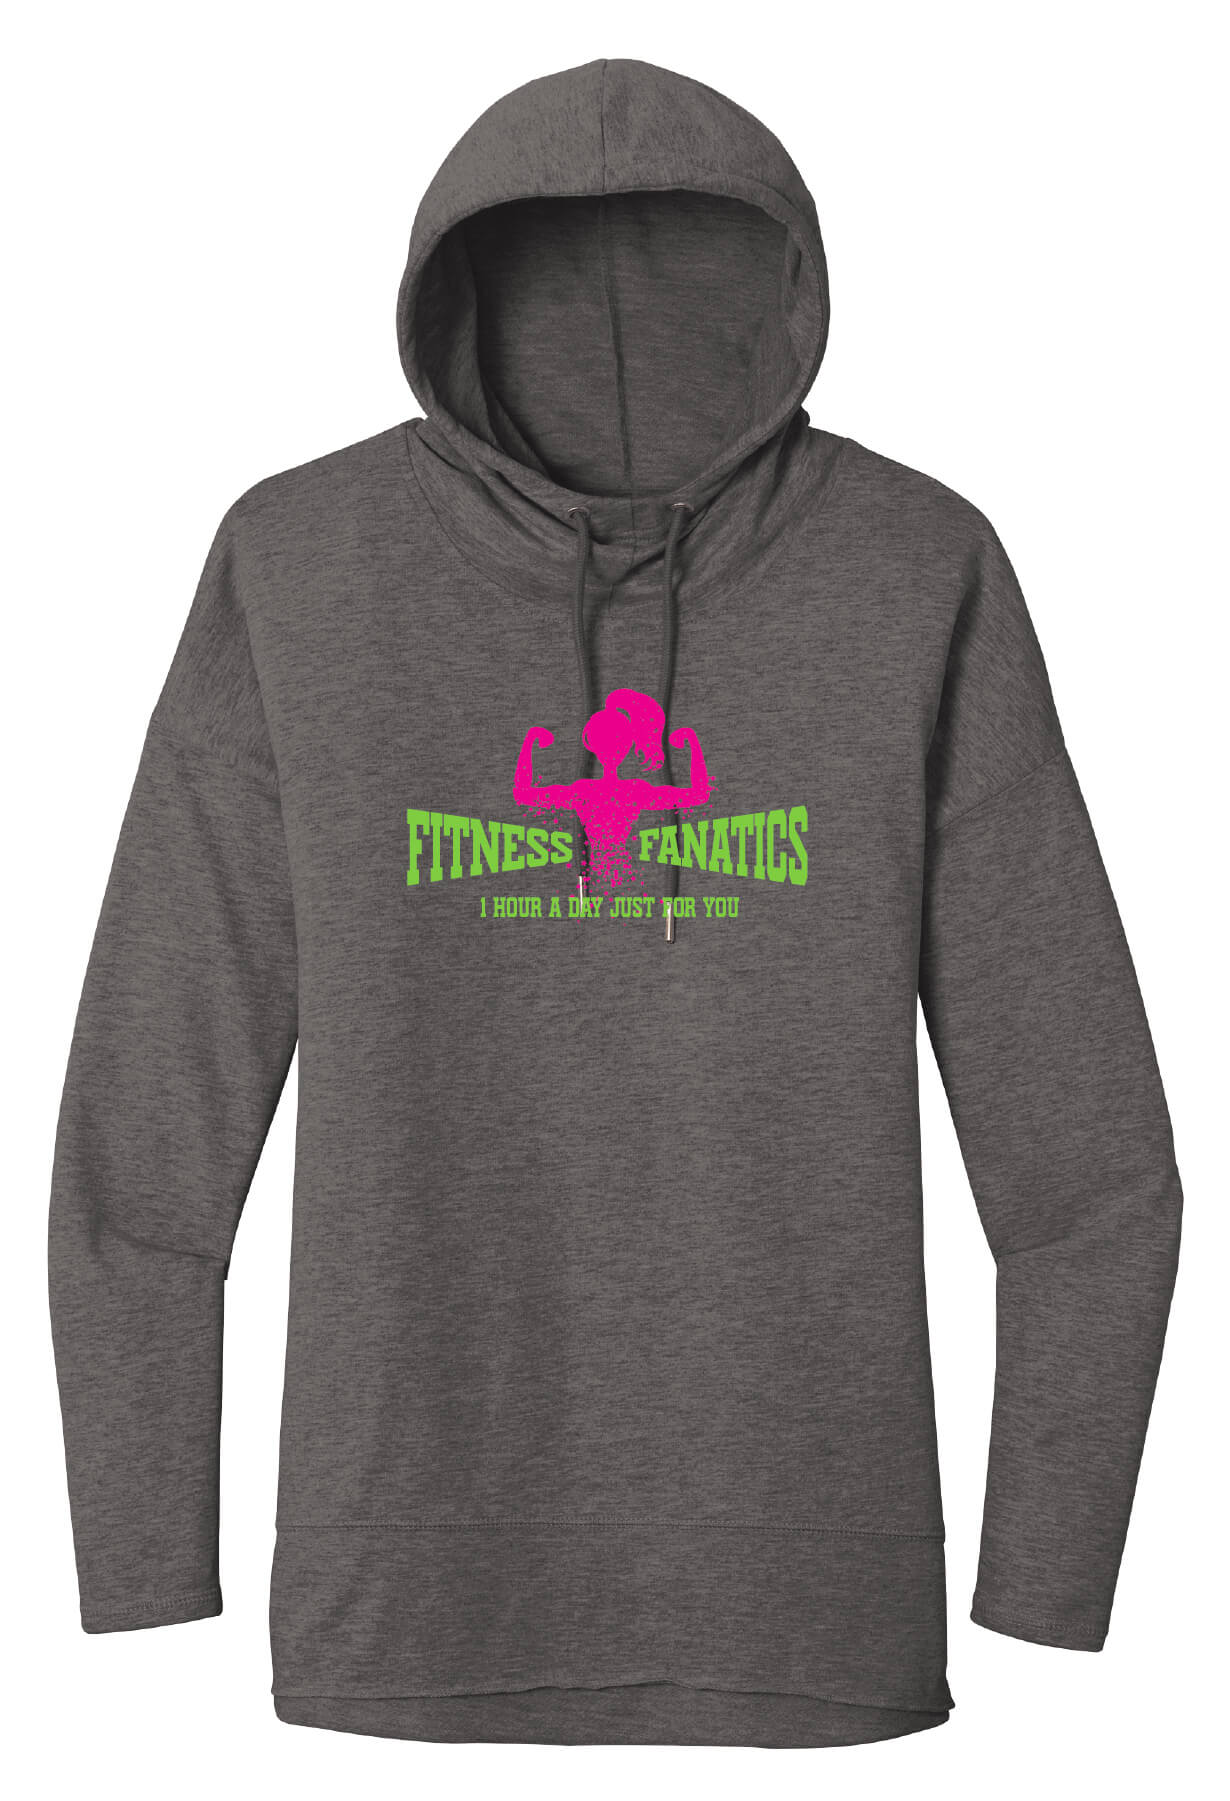 French Terry Hoodie (Womens) gray with pink